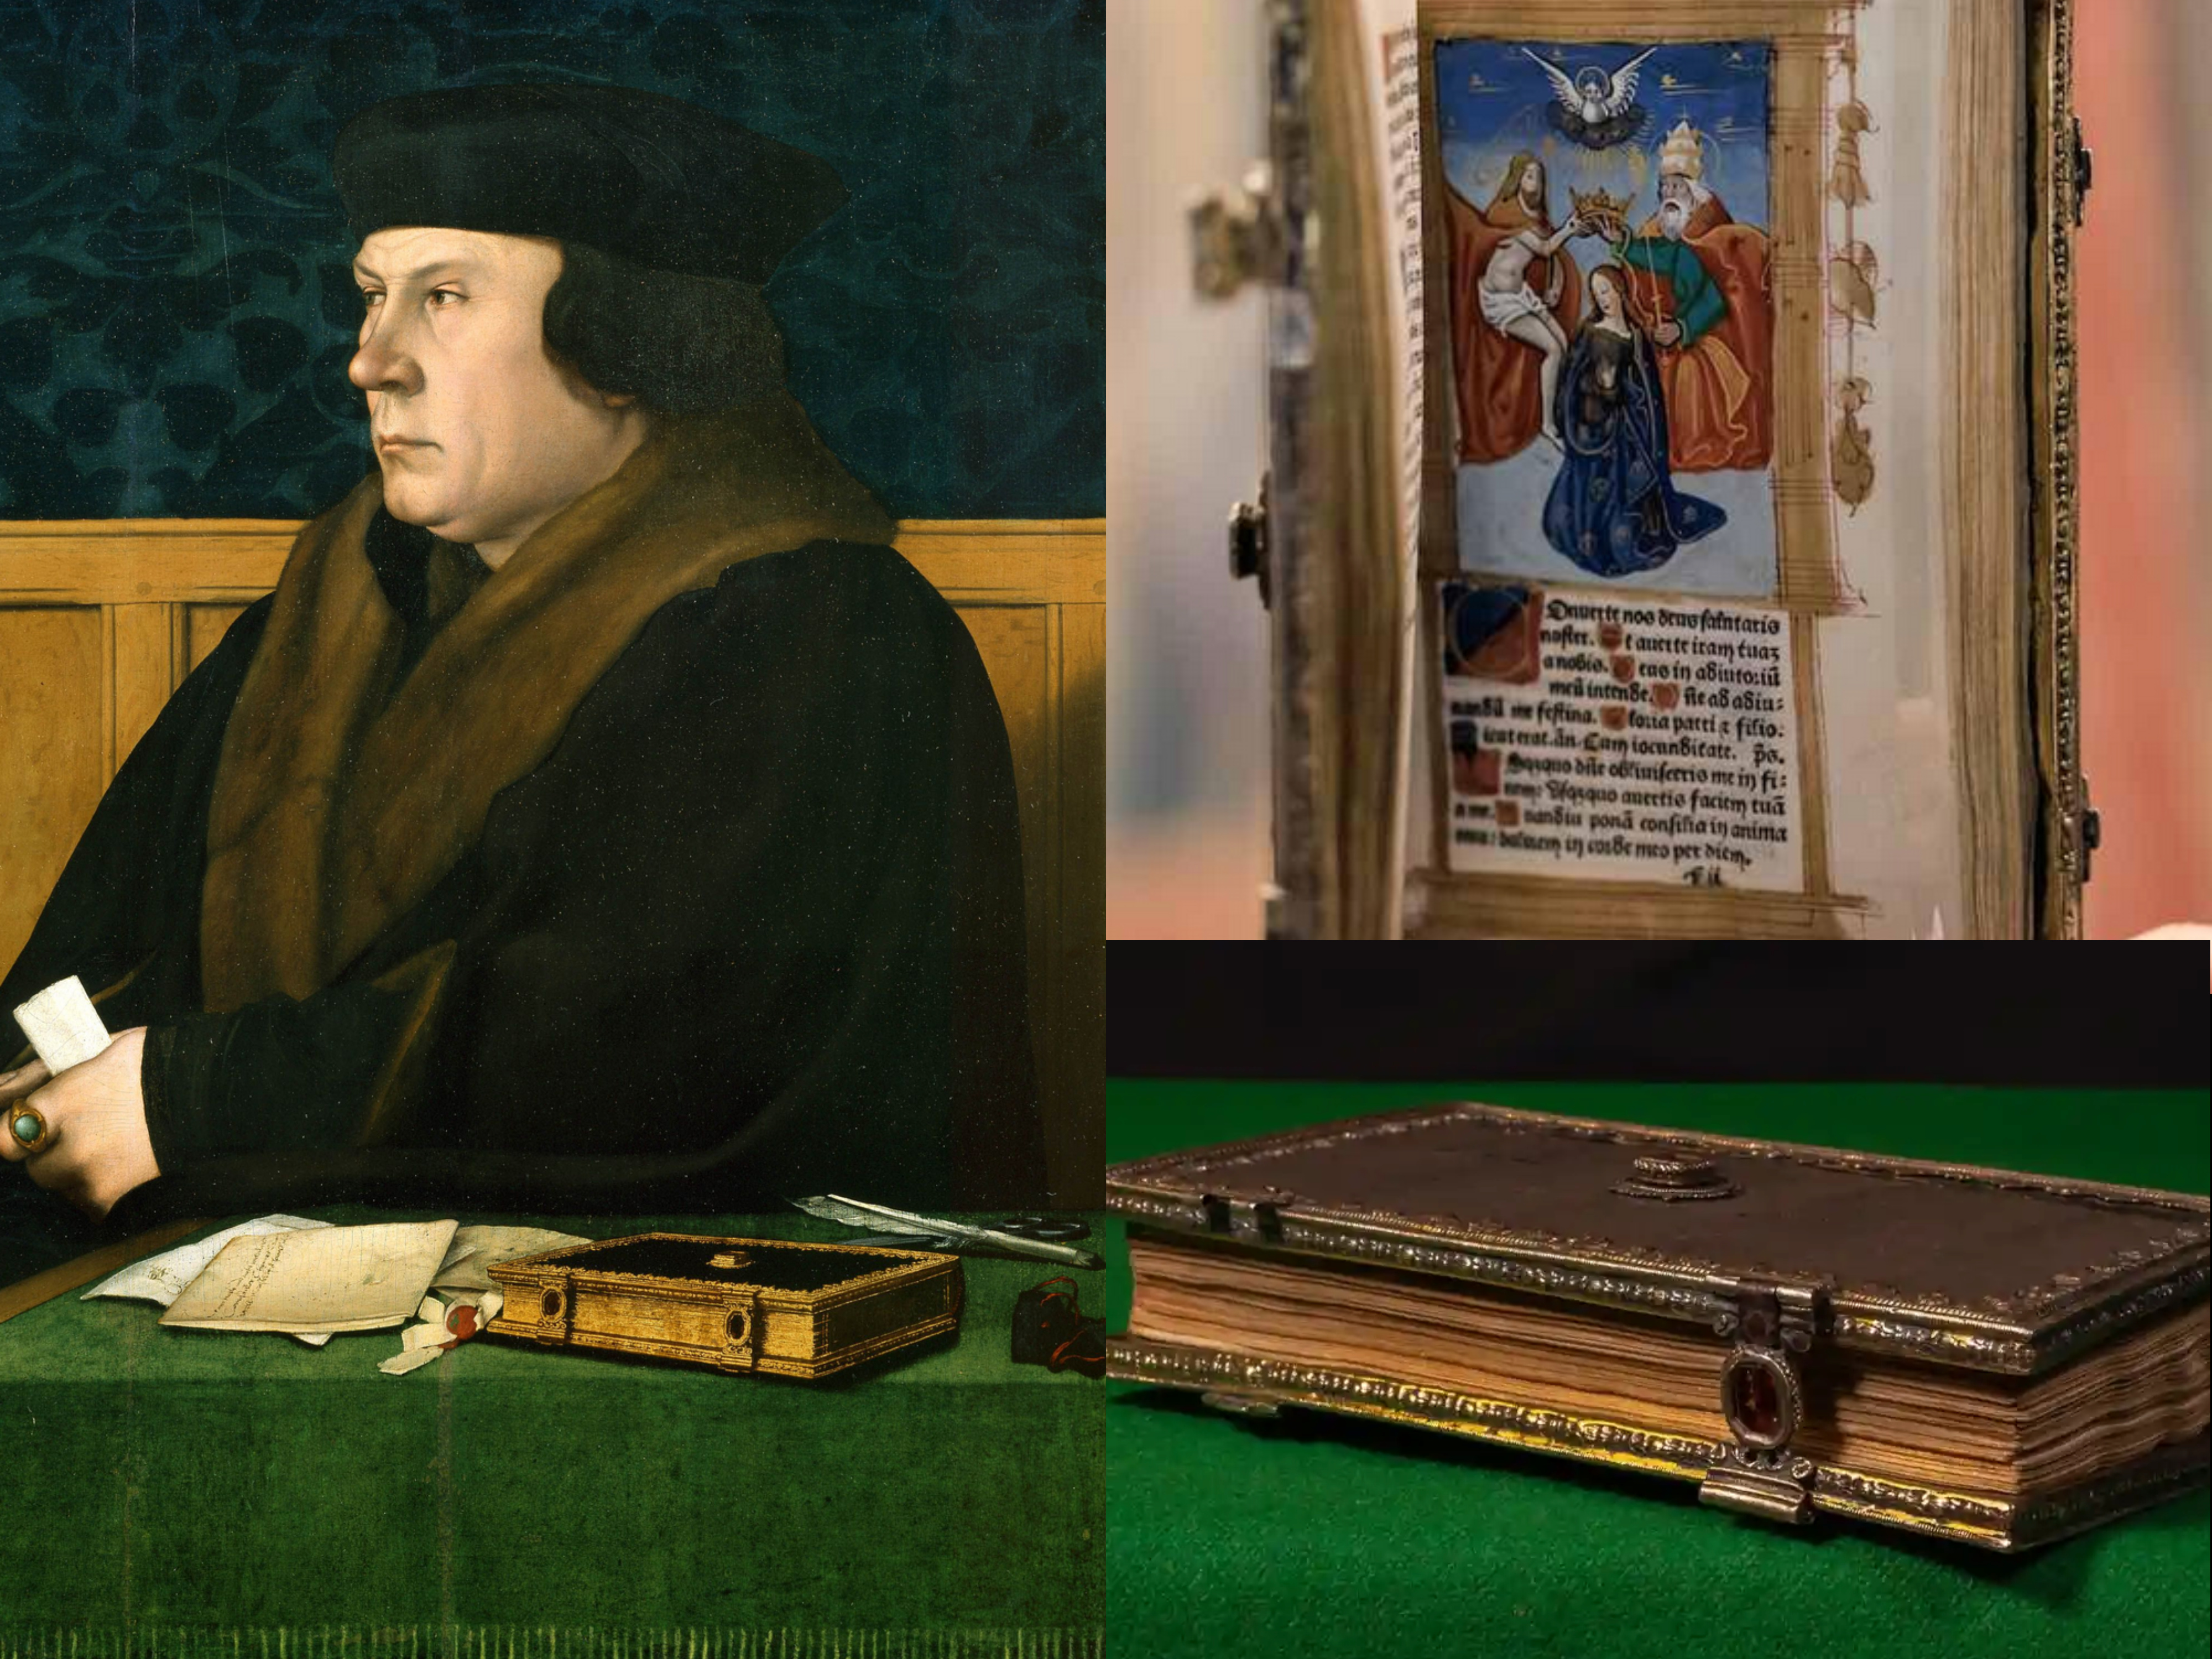 Thomas Cromwell's recently-discovered Book of Hours ca. 1527, shown in his famous portrait by Hans Holbein. The book is in the Library of Trinity College, Cambridge, where it has been since 1660.jpg